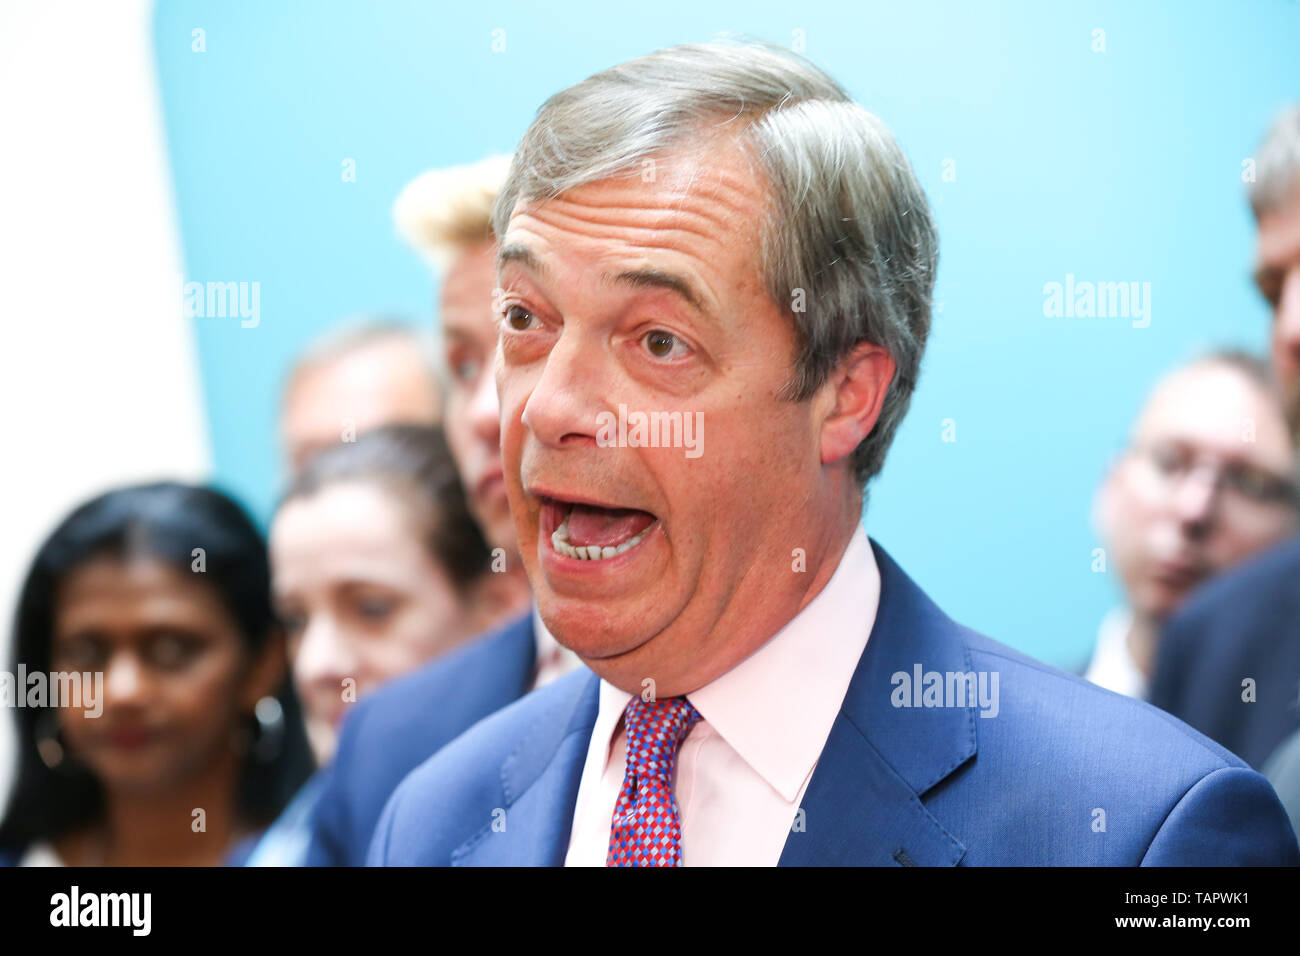 London, UK. 27th May, 2019. Westminster, London, 27 May 2019 - Nigel Farage, leader of the Brexit Party and a MEP for South East England speaking at the EU election results press conference in Westminster. The newly formed Brexit Party wants the UK to leave the EU without an agreement won 10 of the UK's 11 regions, gaining 28 seats, more than 32% of the vote across the country and are largest party in nine regions. Credit: Dinendra Haria/Alamy Live News Stock Photo